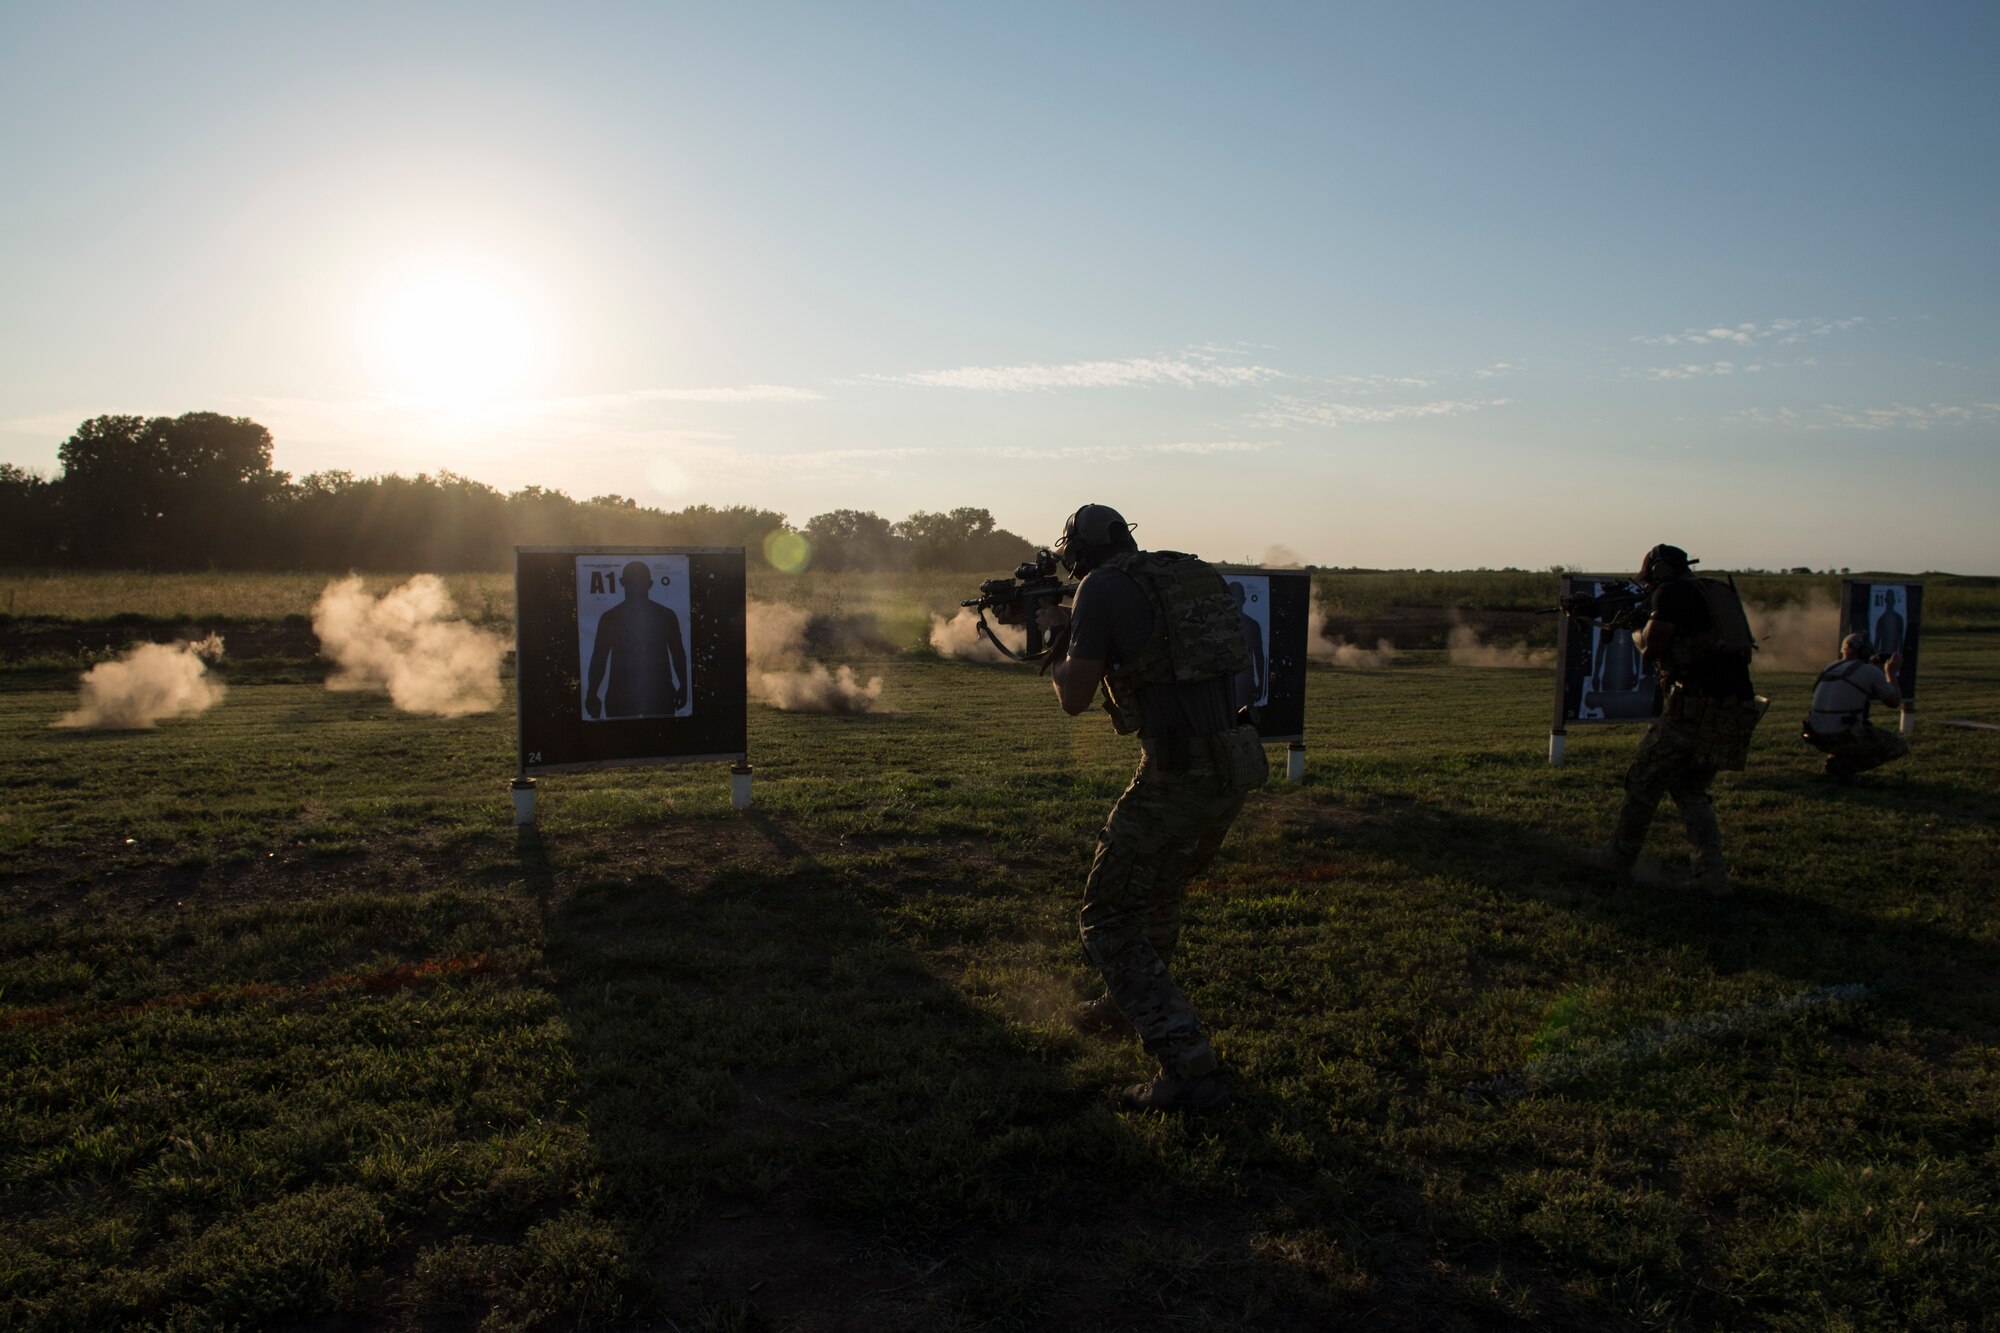 Students fire M4 carbines at targets during a full spectrum operator course, Aug. 29, 2018, at Smoky Hill Air National Guard Range, Kan. The course was held Aug. 26-31, and incorporated specific duties performed by tactical air control party members and security forces personnel to build on their gunfighting skills. (U.S. Air Force photo by Senior Airman Janiqua P. Robinson)